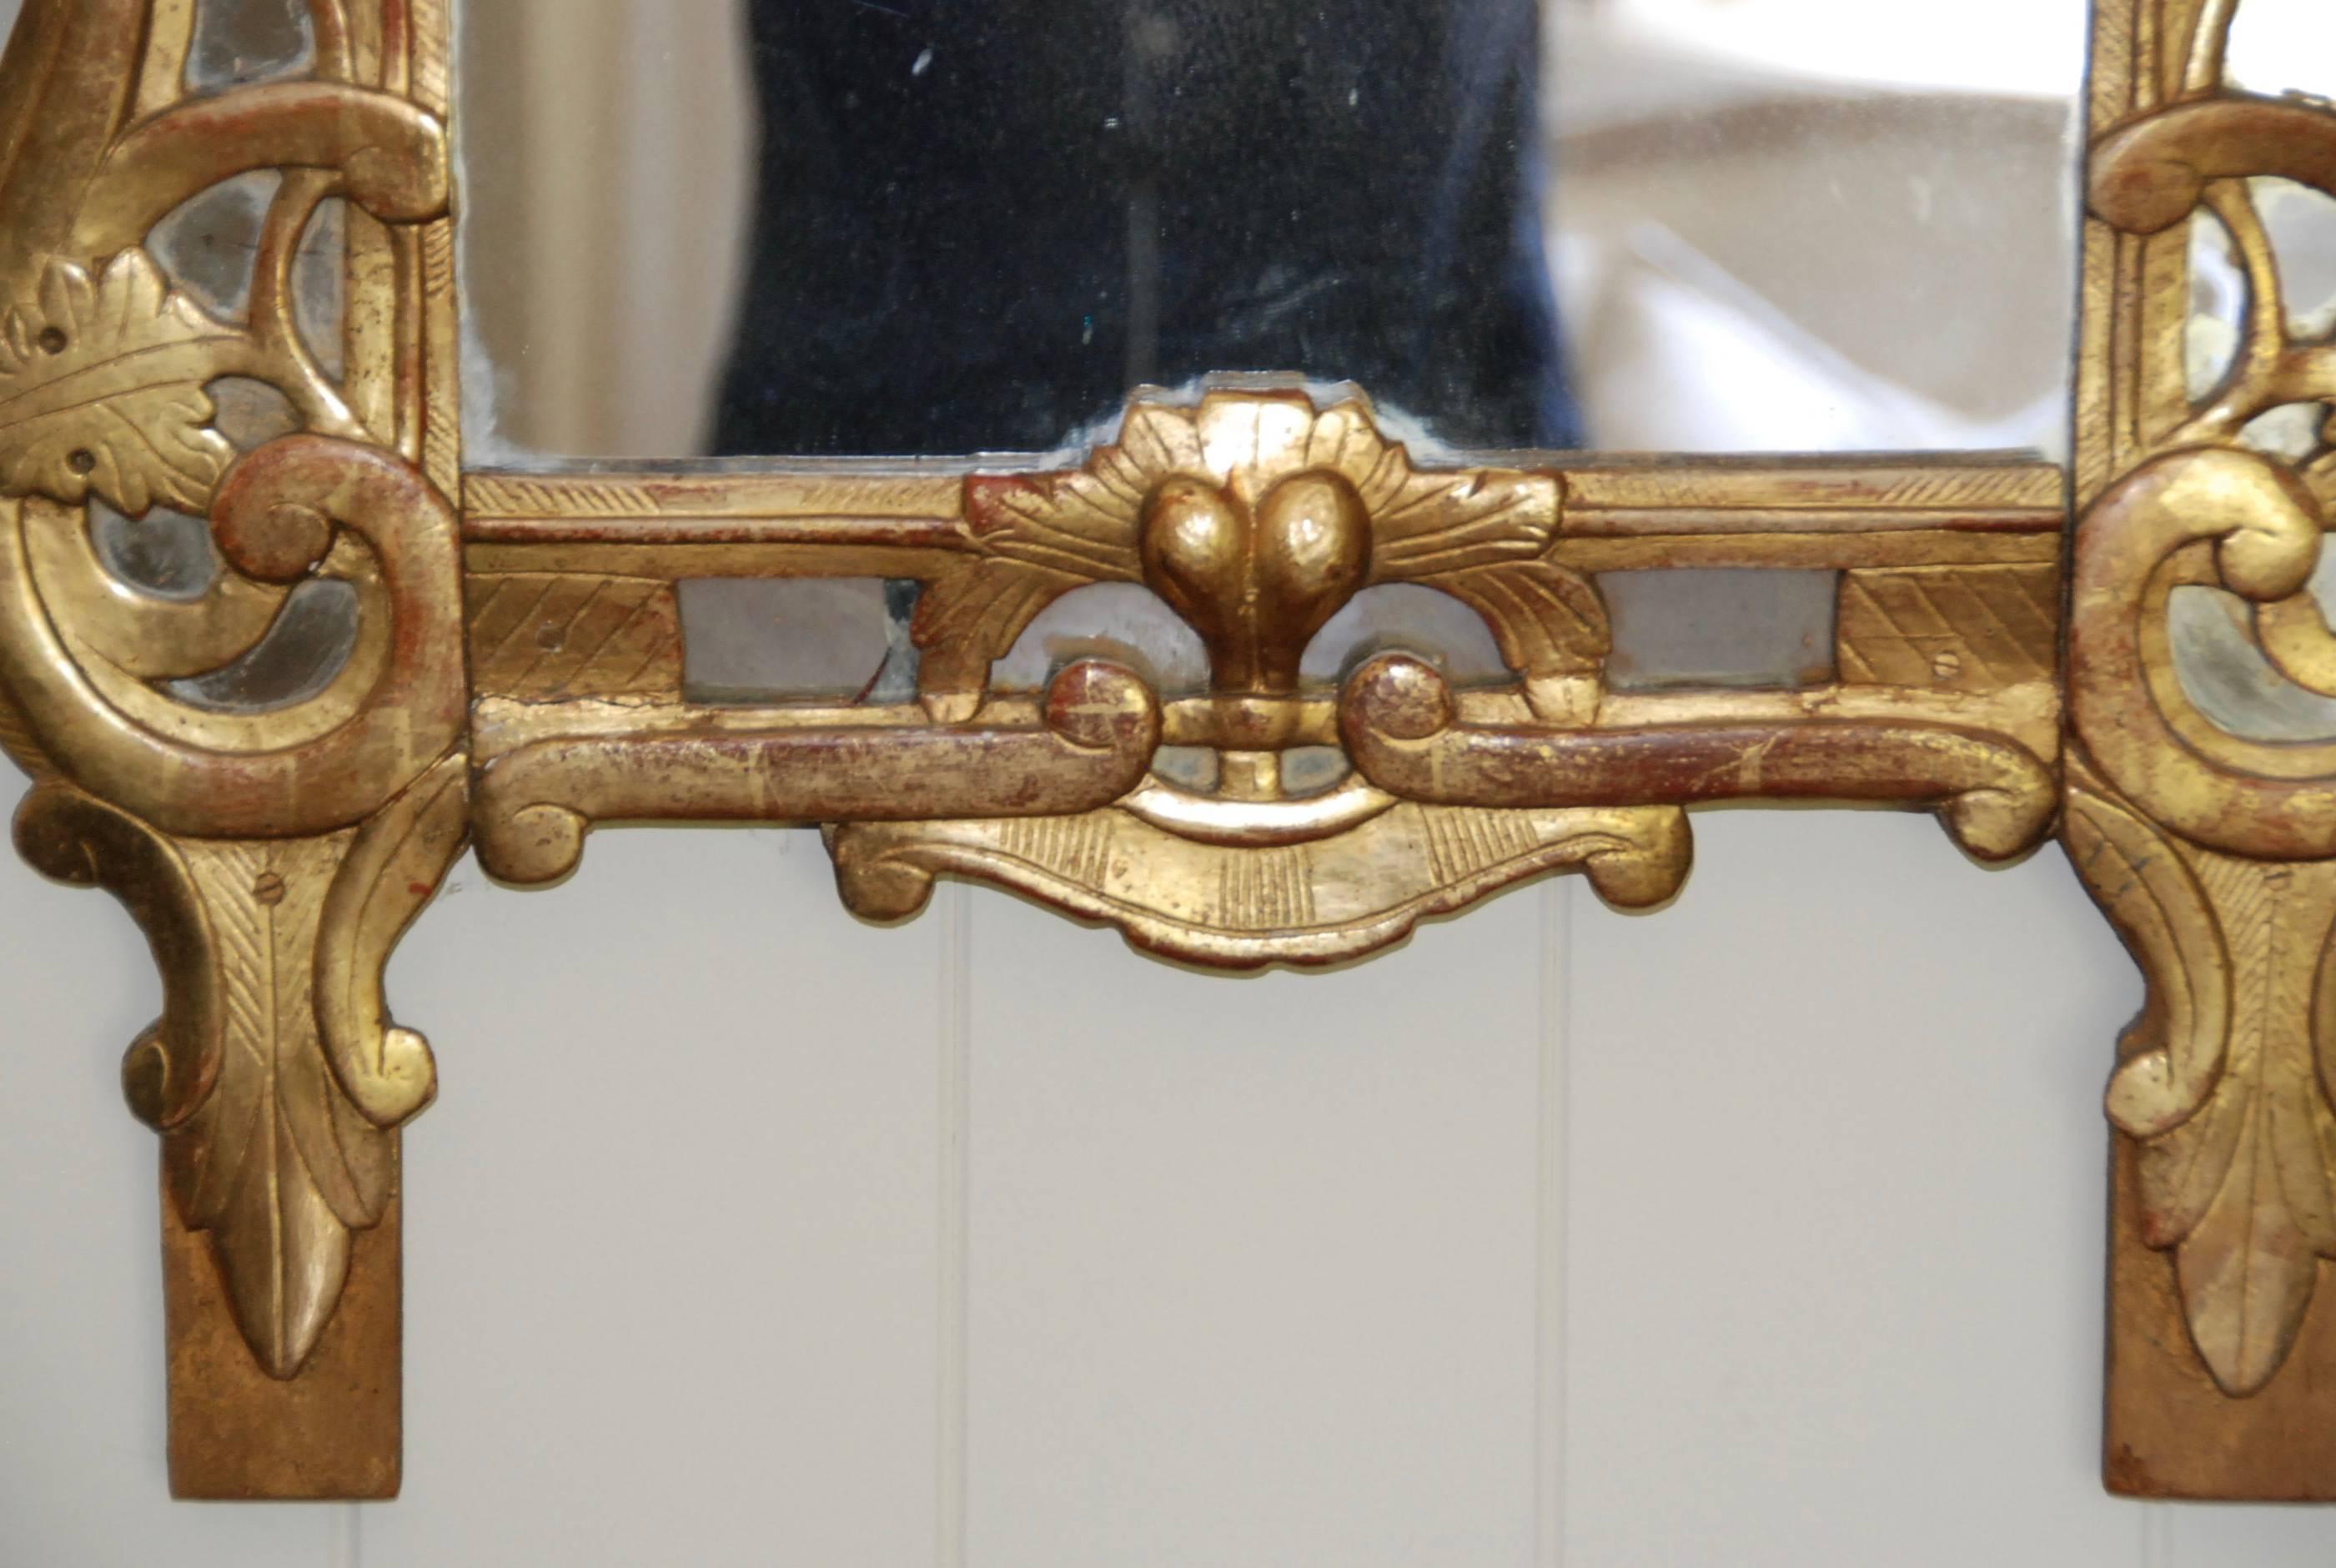 Early 19th Century French Provencal Mirror In Excellent Condition For Sale In Encinitas, CA